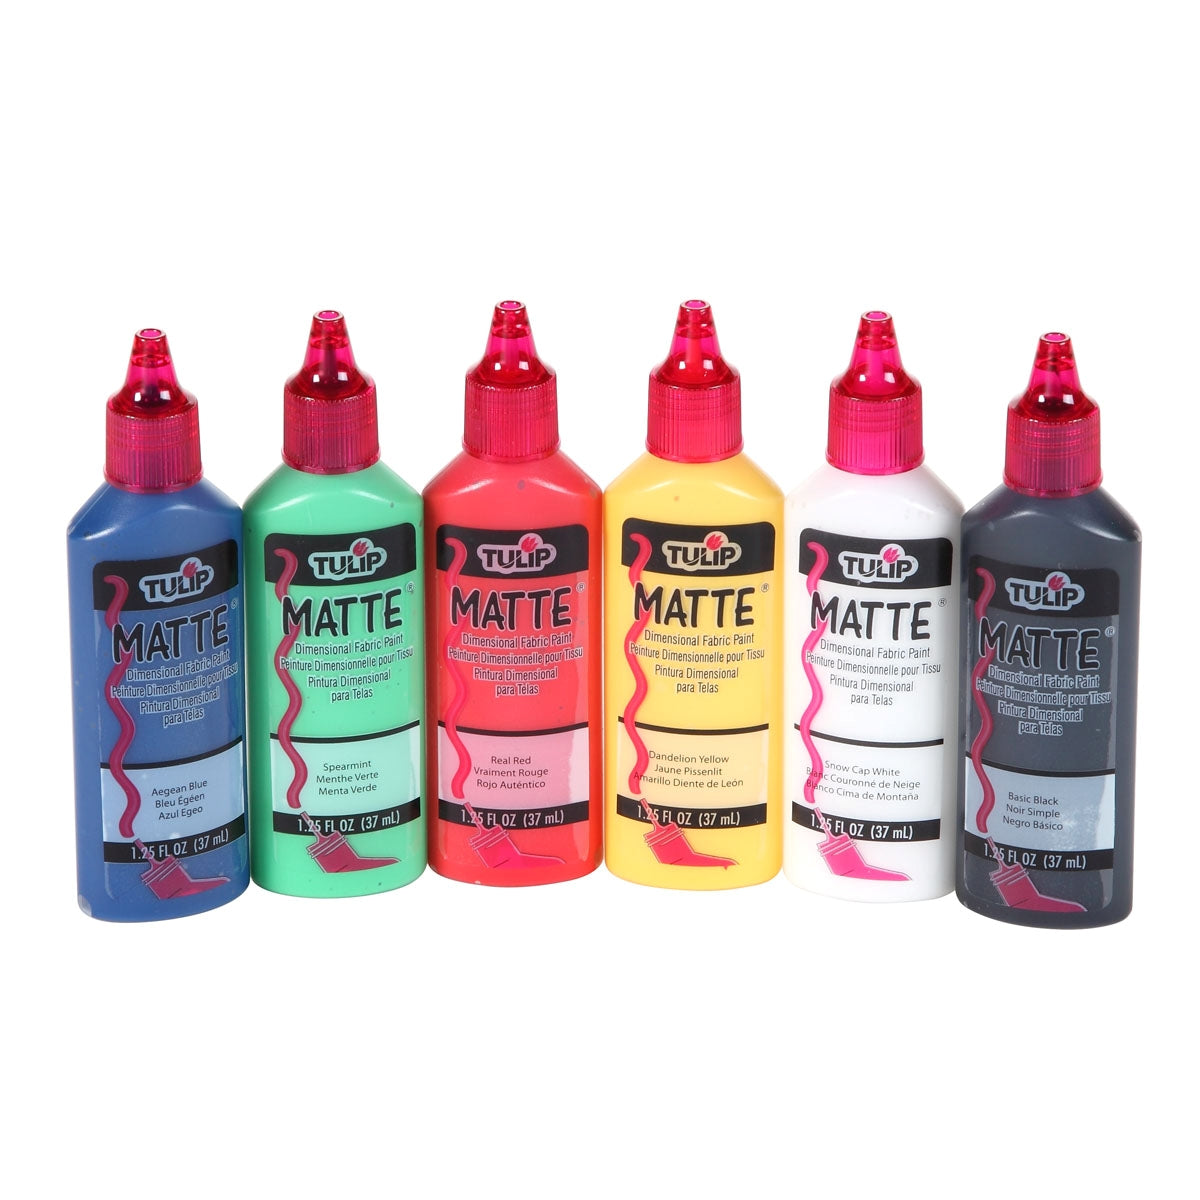 Matte fabric paints for Fabric Painting and Coloring. Large Selection of  Textile Paints